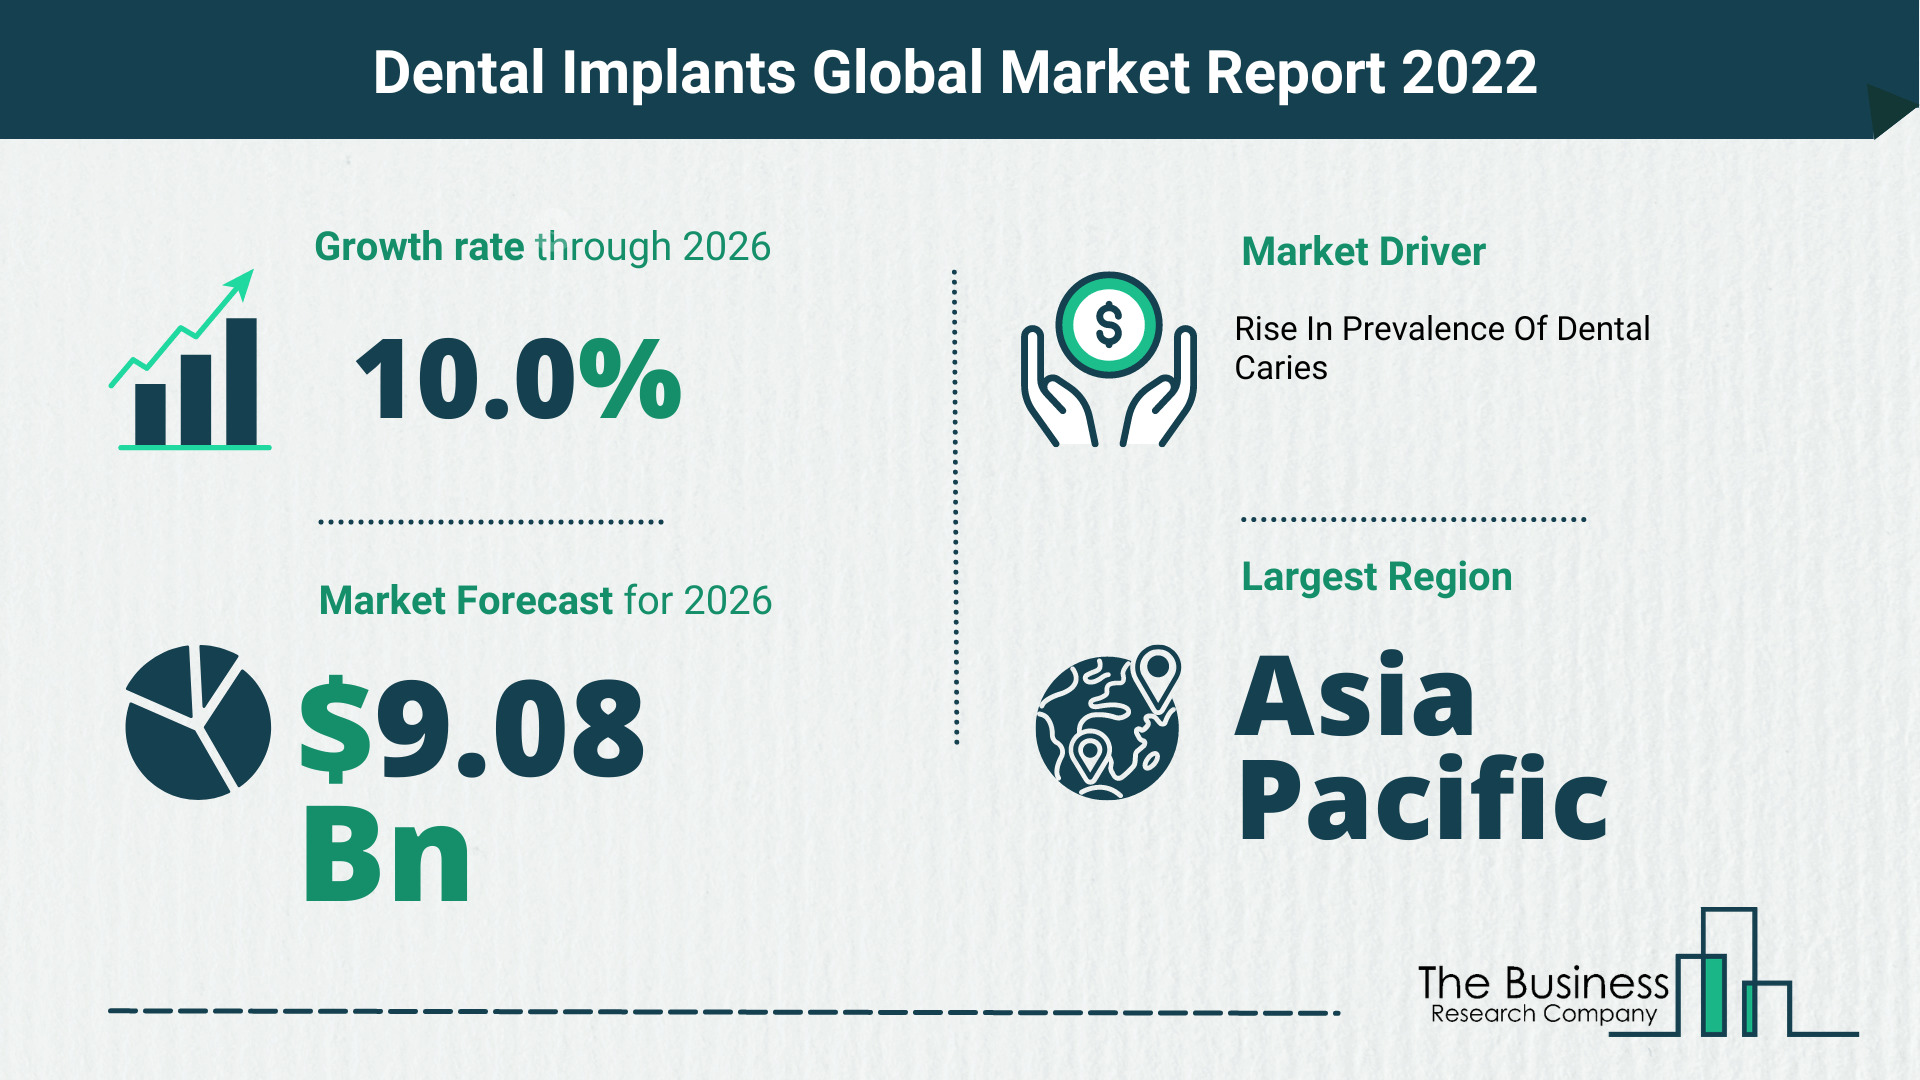 The Dental Implants Market Share, Market Size, And Growth Rate 2022